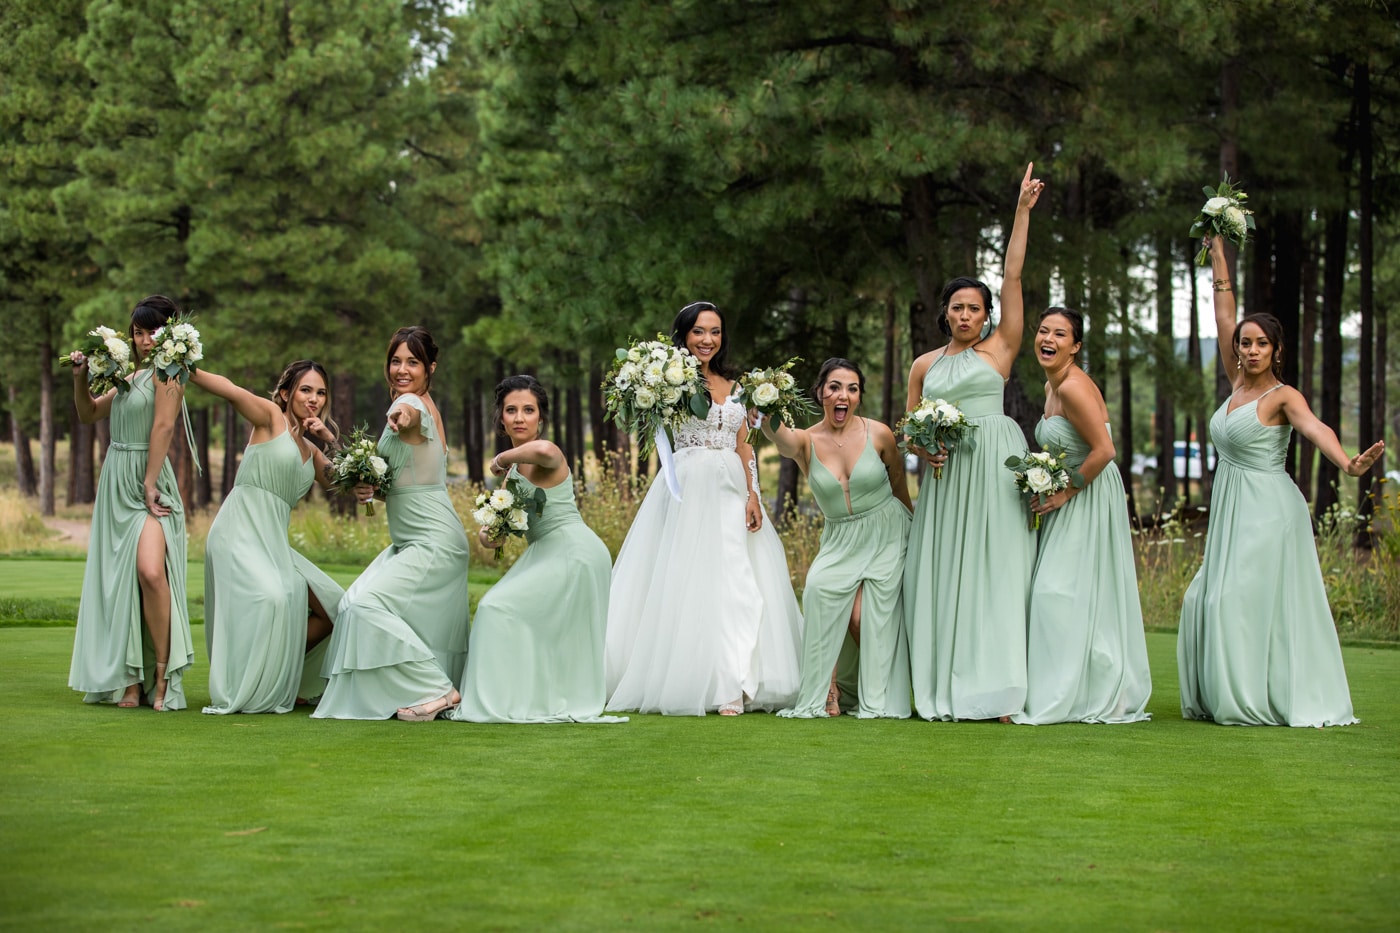 Bride and bridesmaids fun pose in front of trees